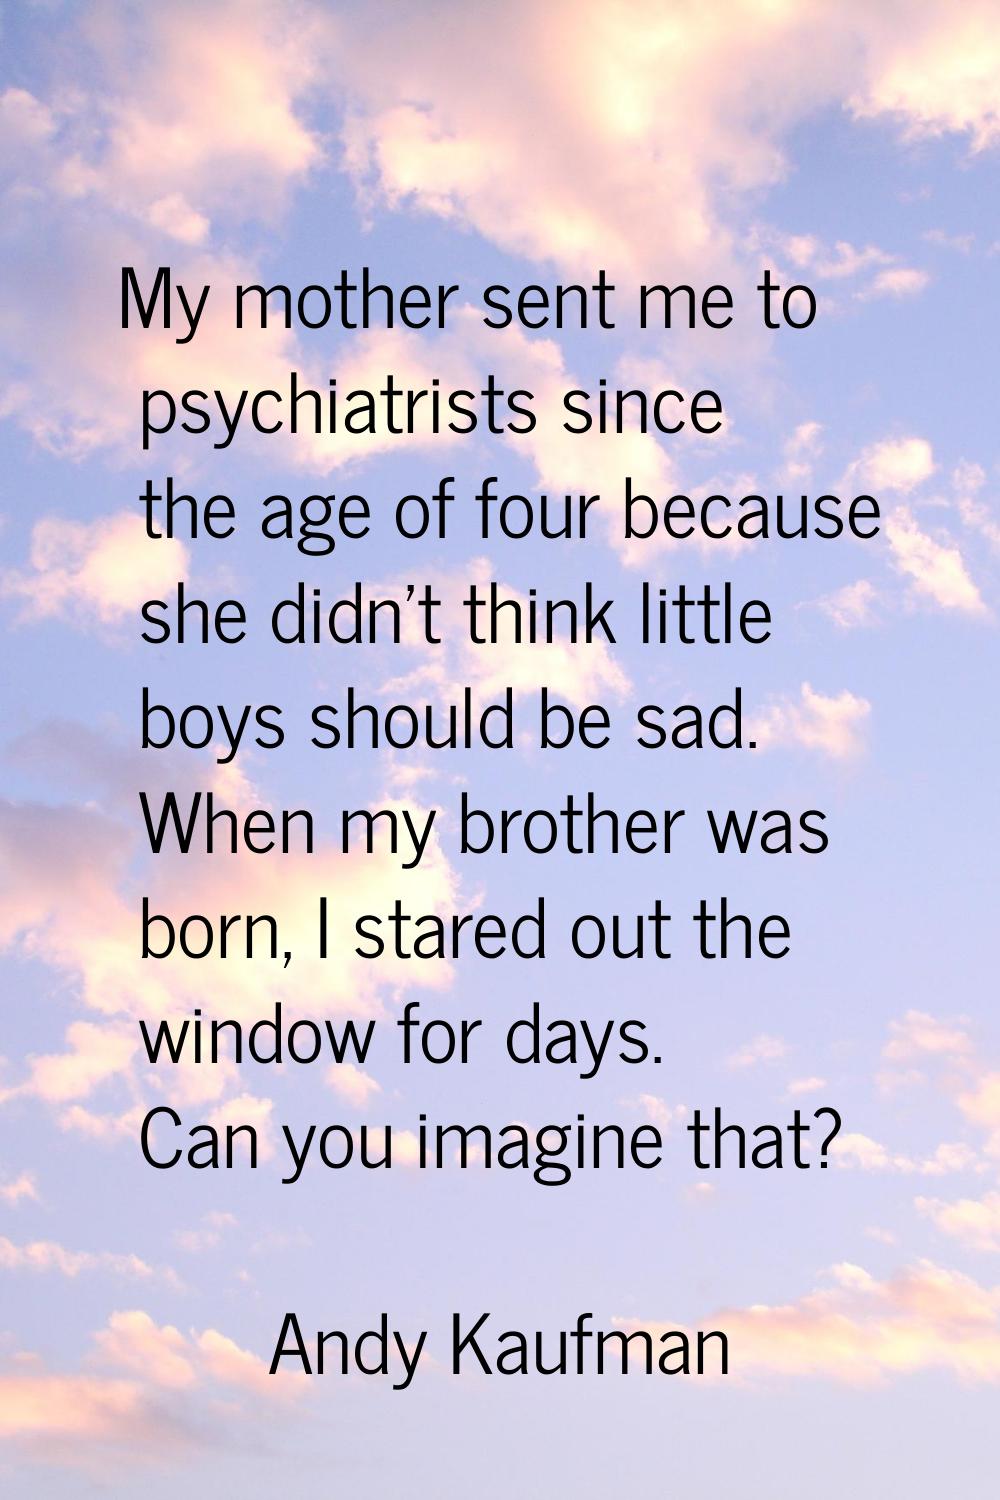 My mother sent me to psychiatrists since the age of four because she didn't think little boys shoul